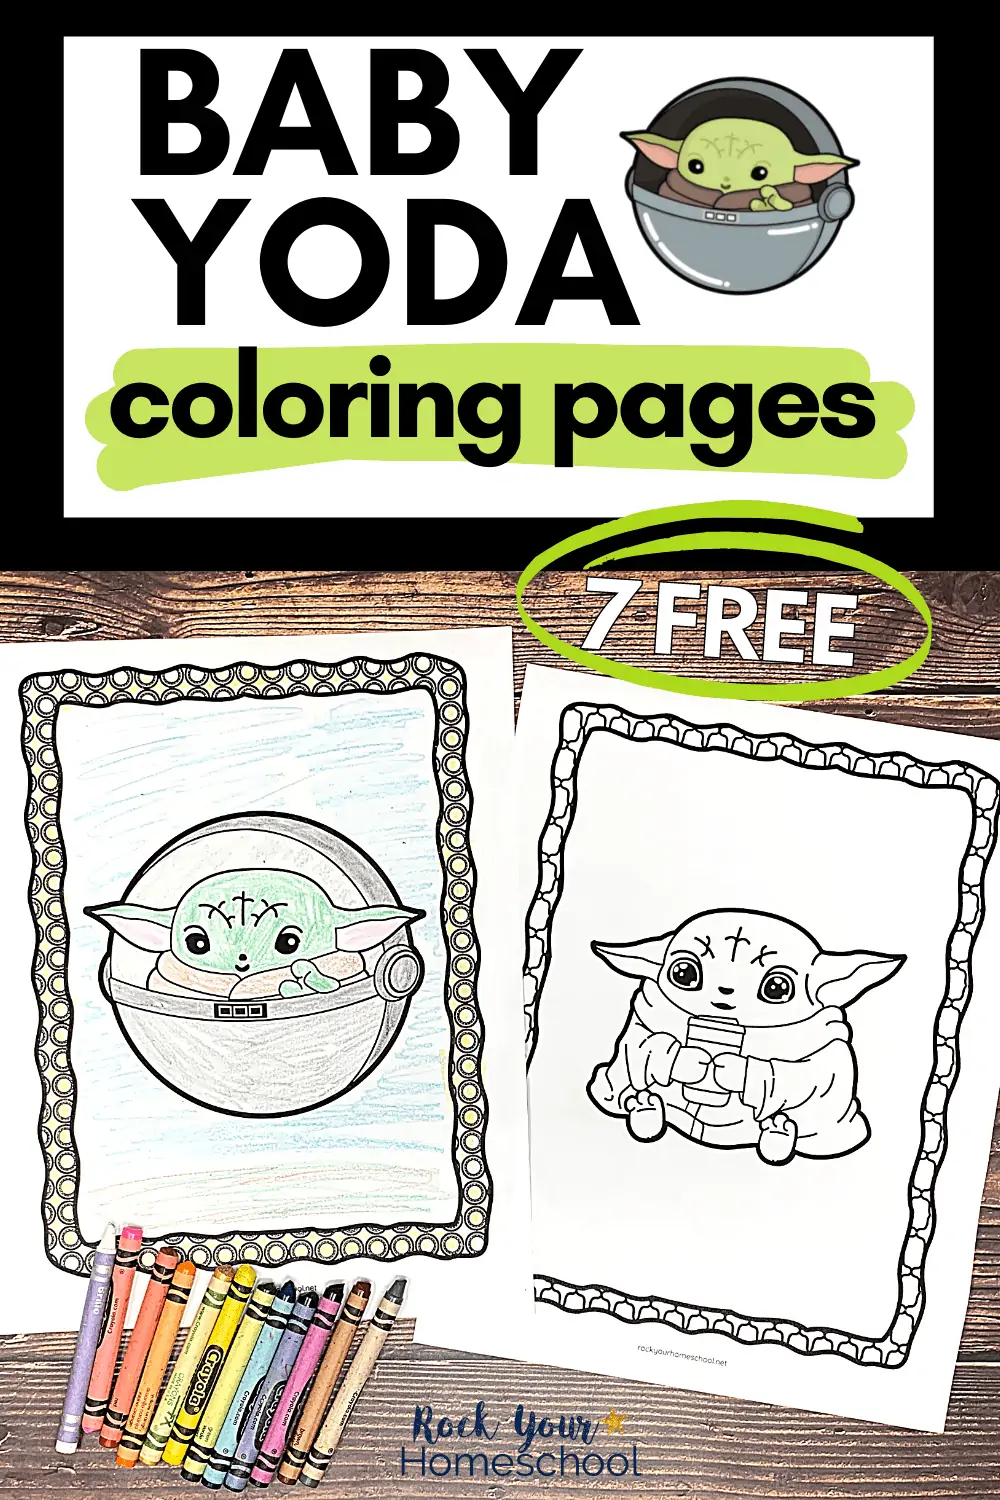 7 Free Baby Yoda Coloring Pages for Super Fun Activities